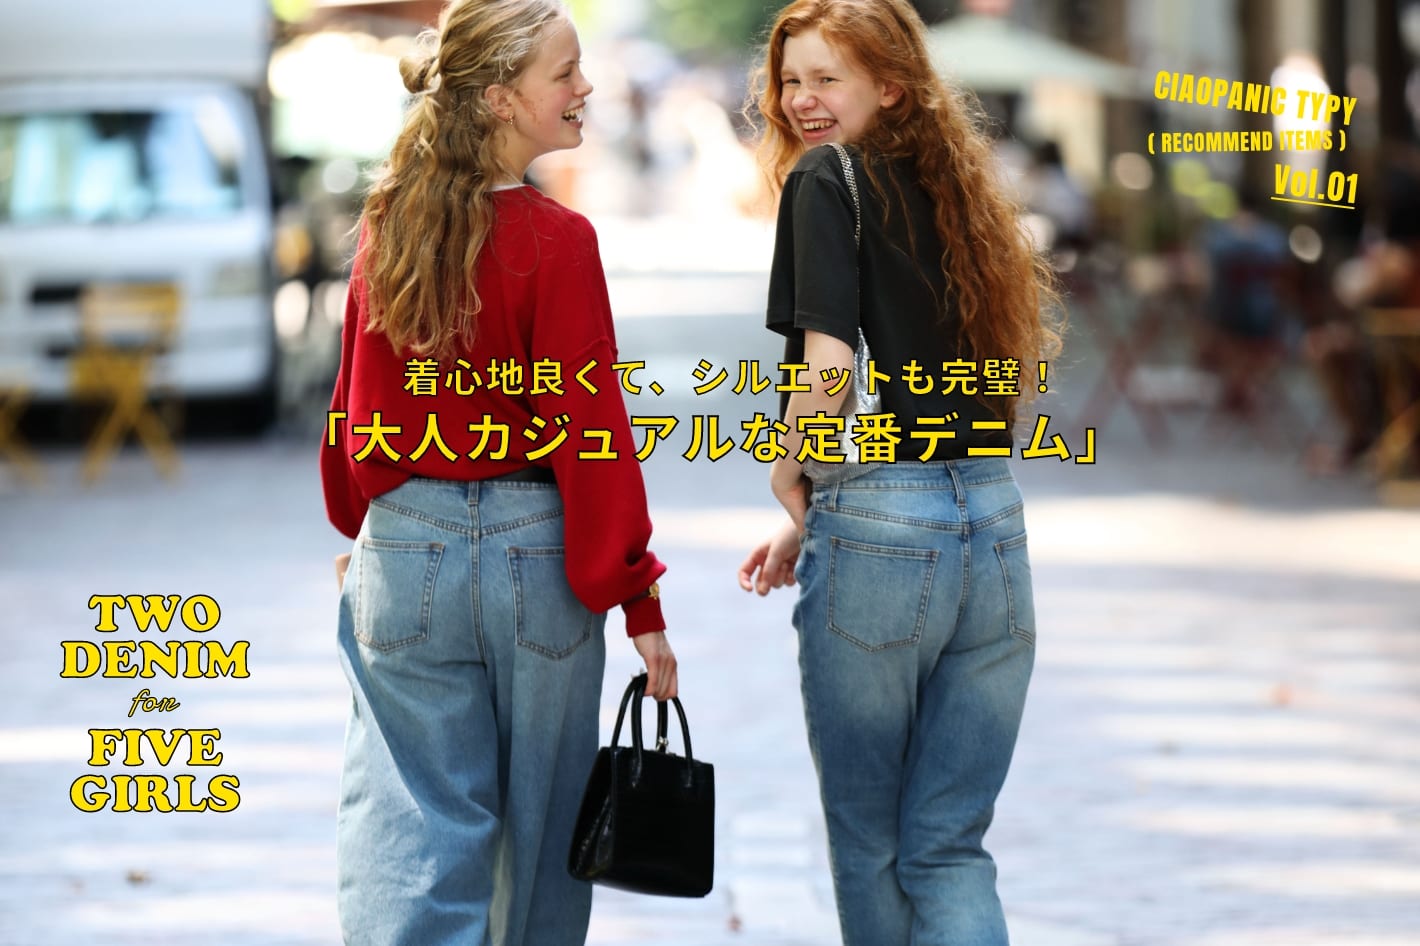 CIAOPANIC TYPY CIAOPANIC TYPY【RECOMMEND ITEM】Vol.1 「大人カジュアルな定番デニム」